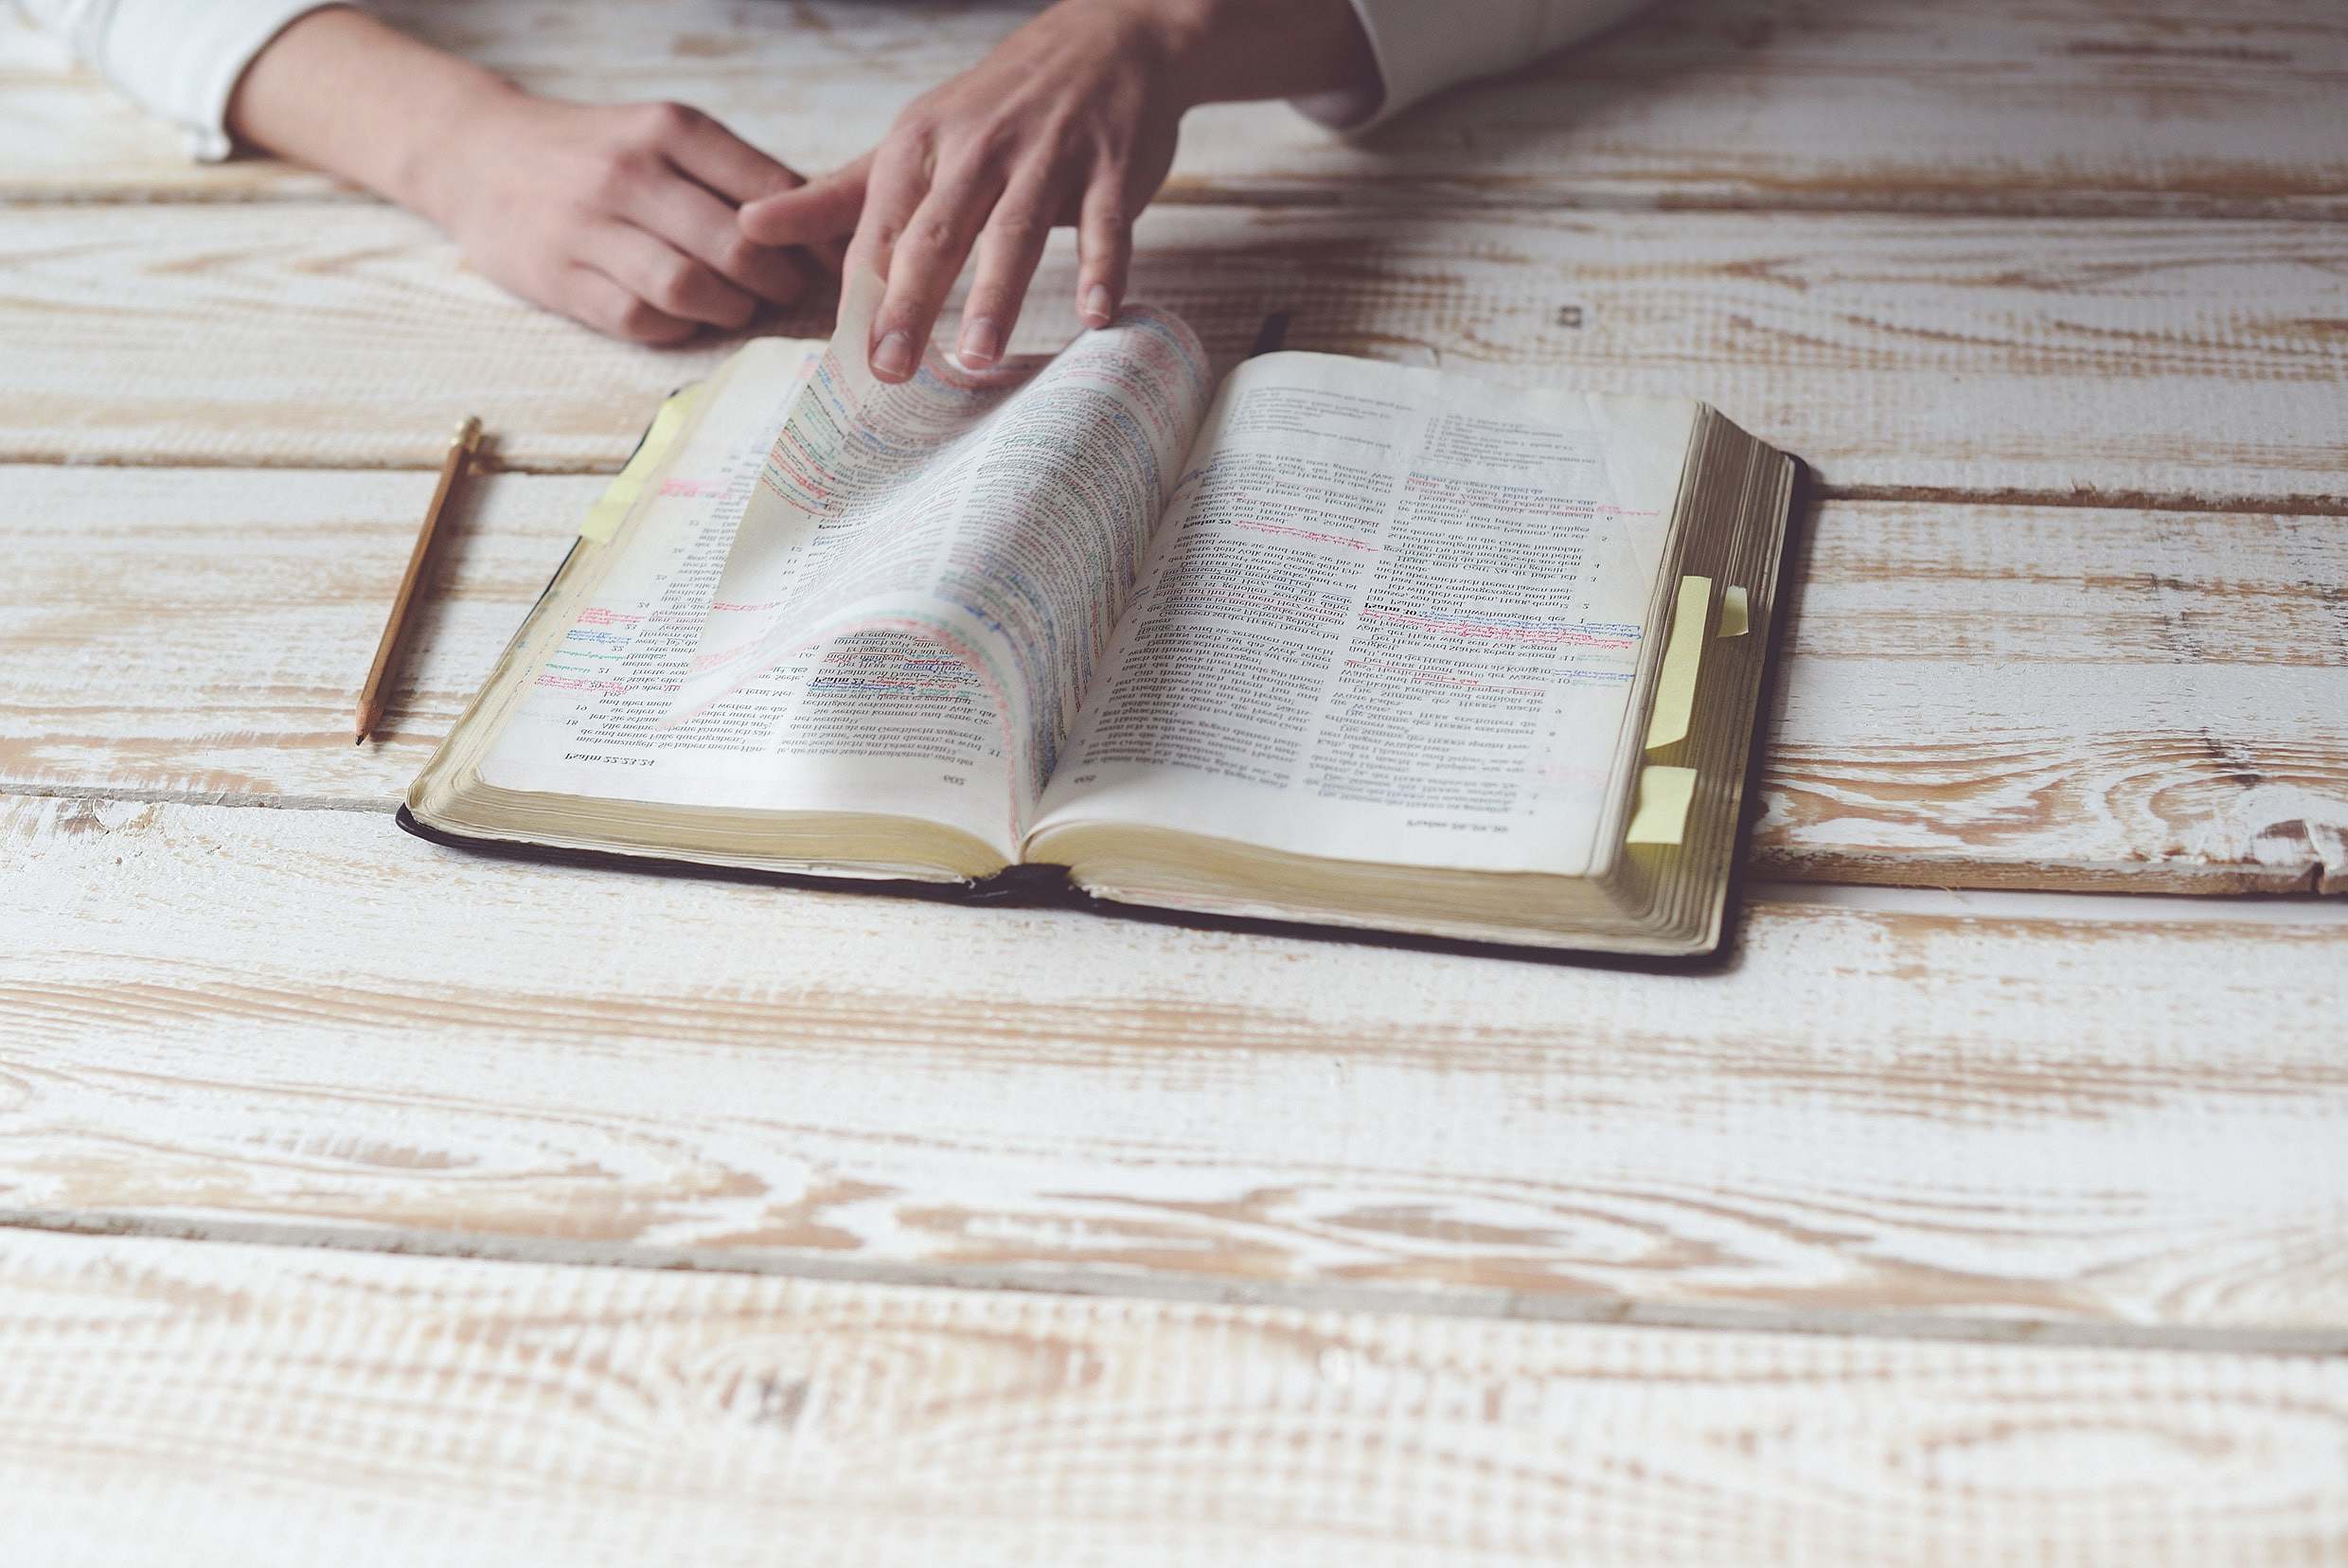 Bible Person Reading Book Study Image Free Photo